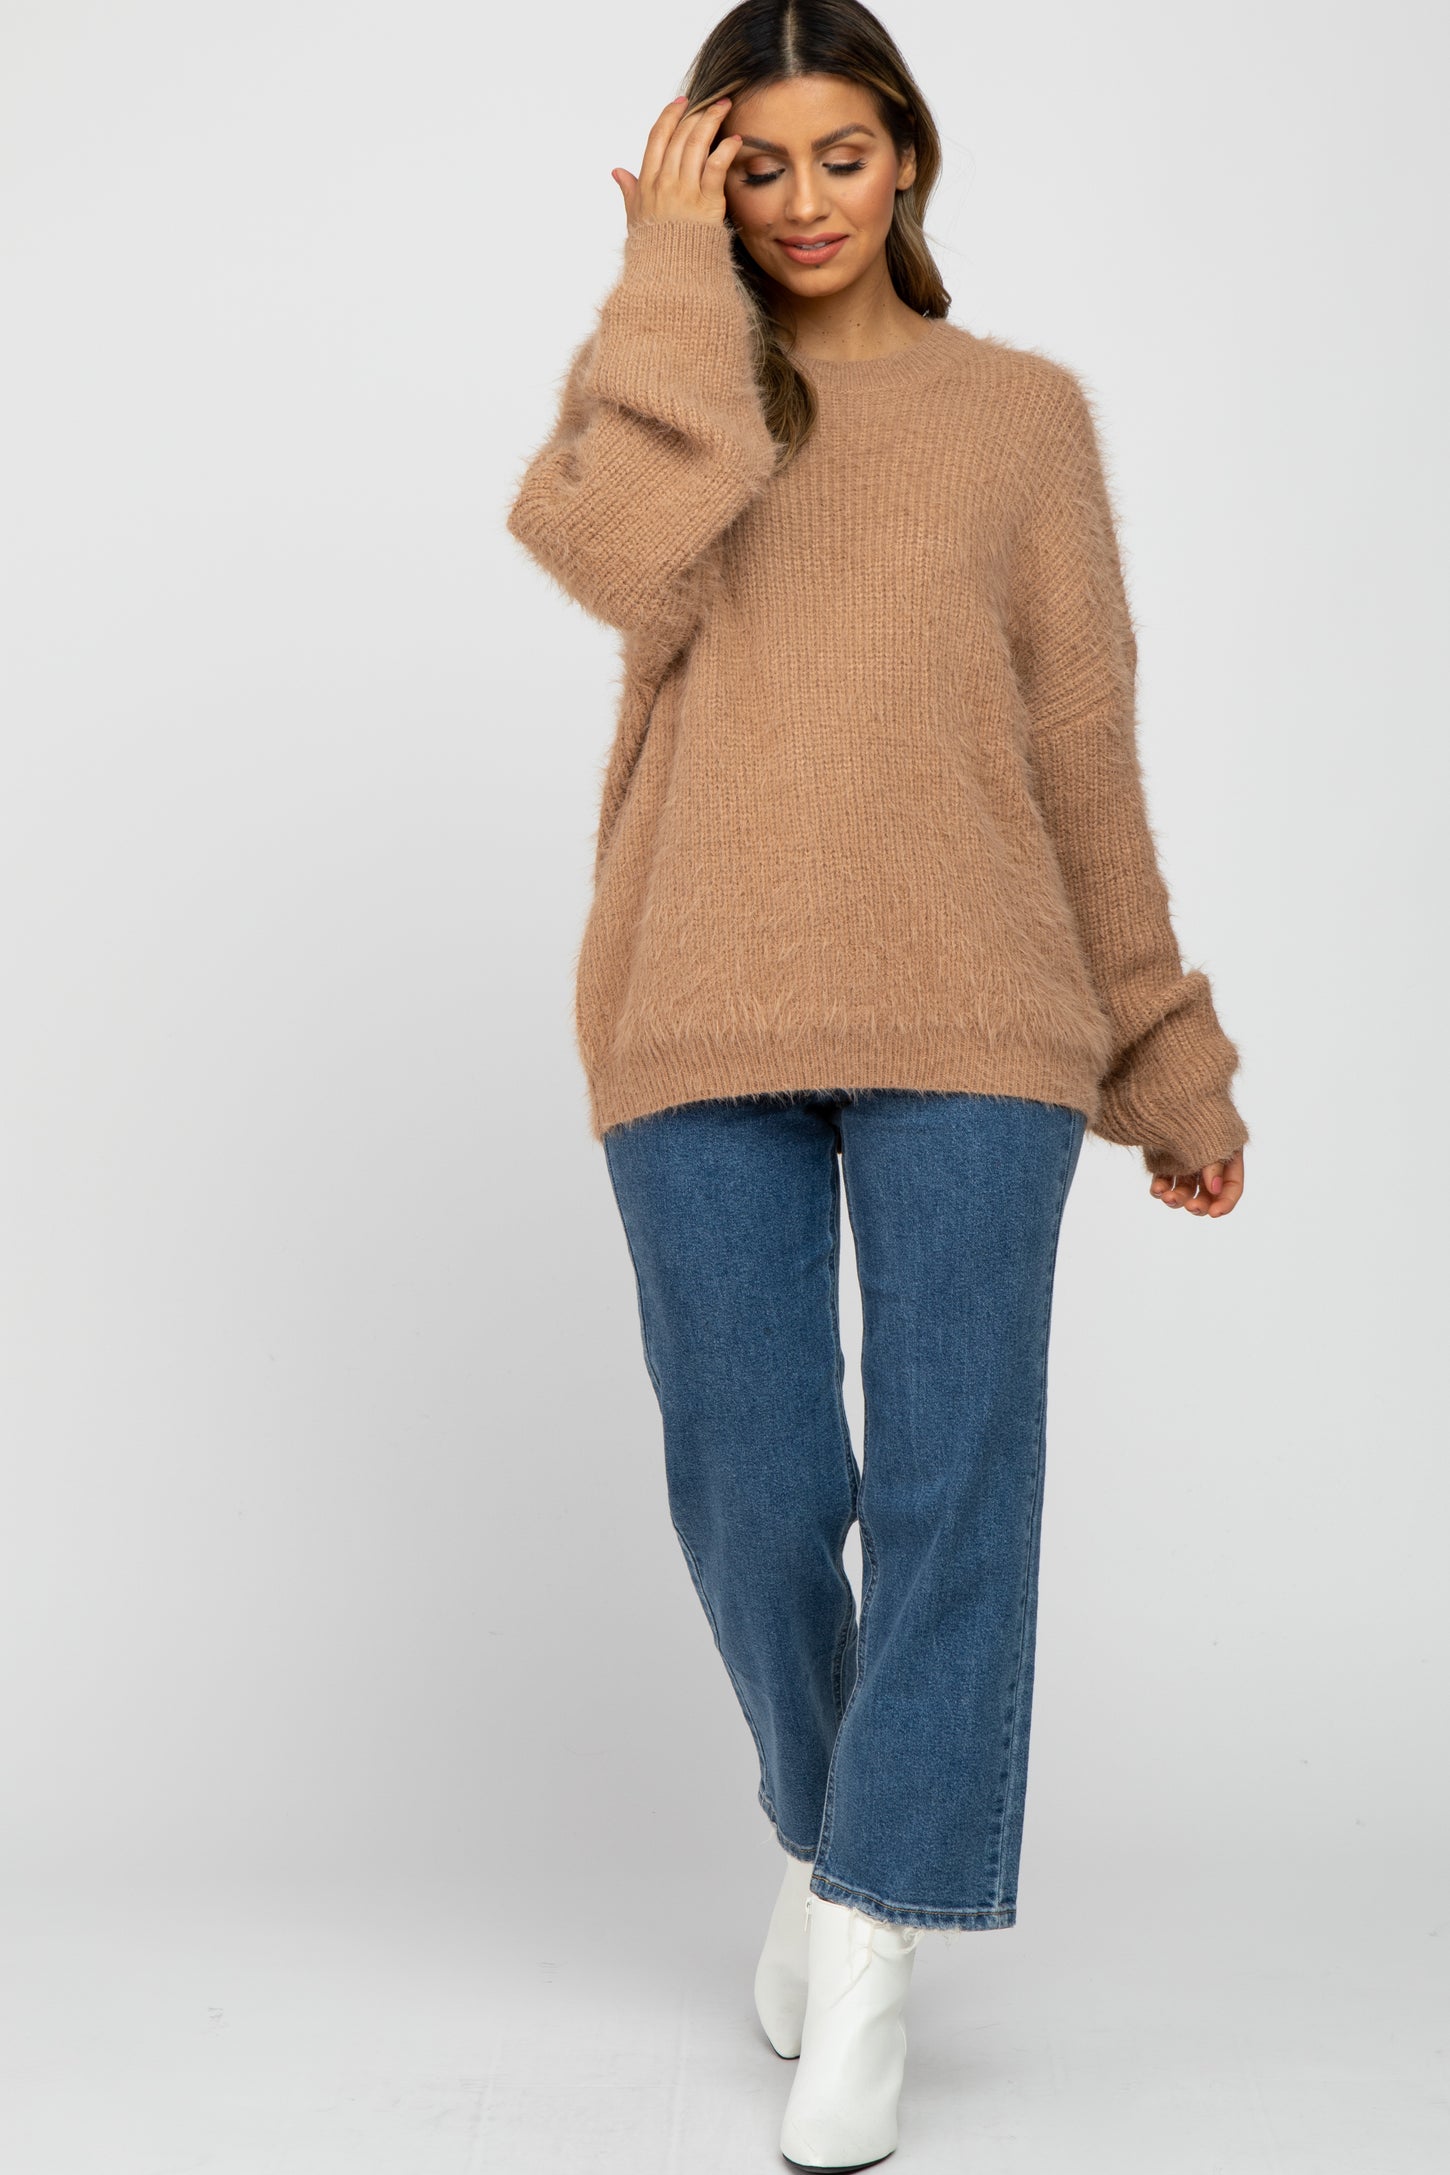 Taupe Fuzzy Chunky Knit Sweater